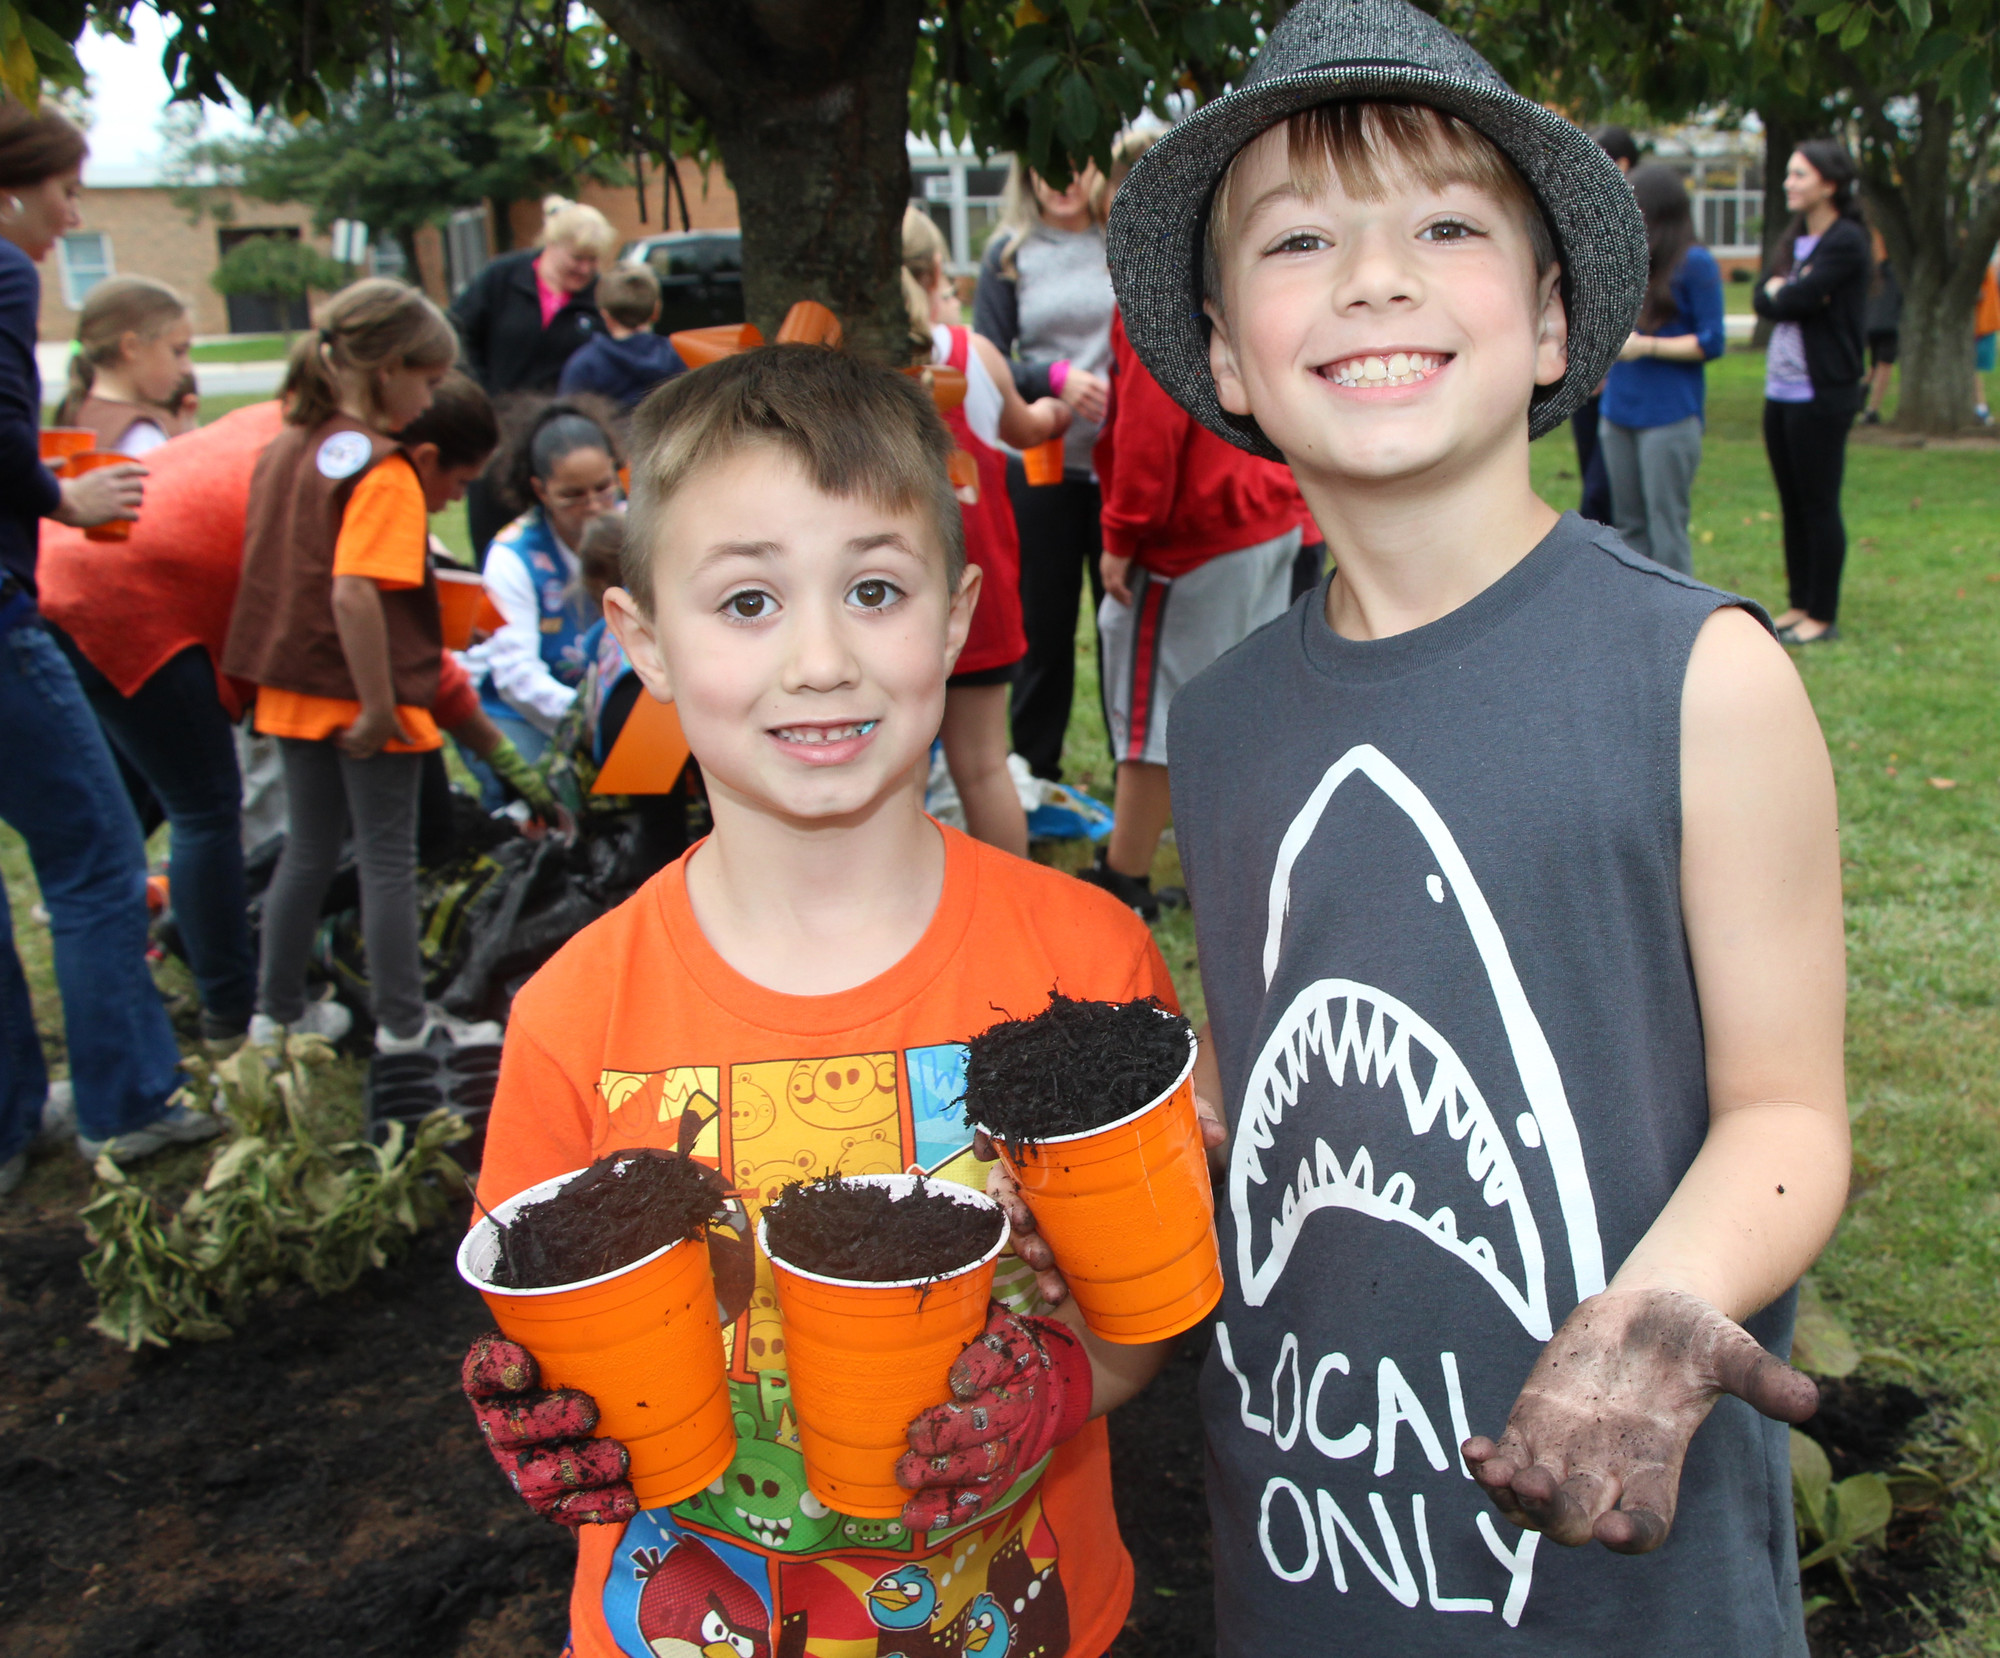 Ryan Zsamboky, 6, and his older brother Ryan, 8, had no problem getting their hands dirty.